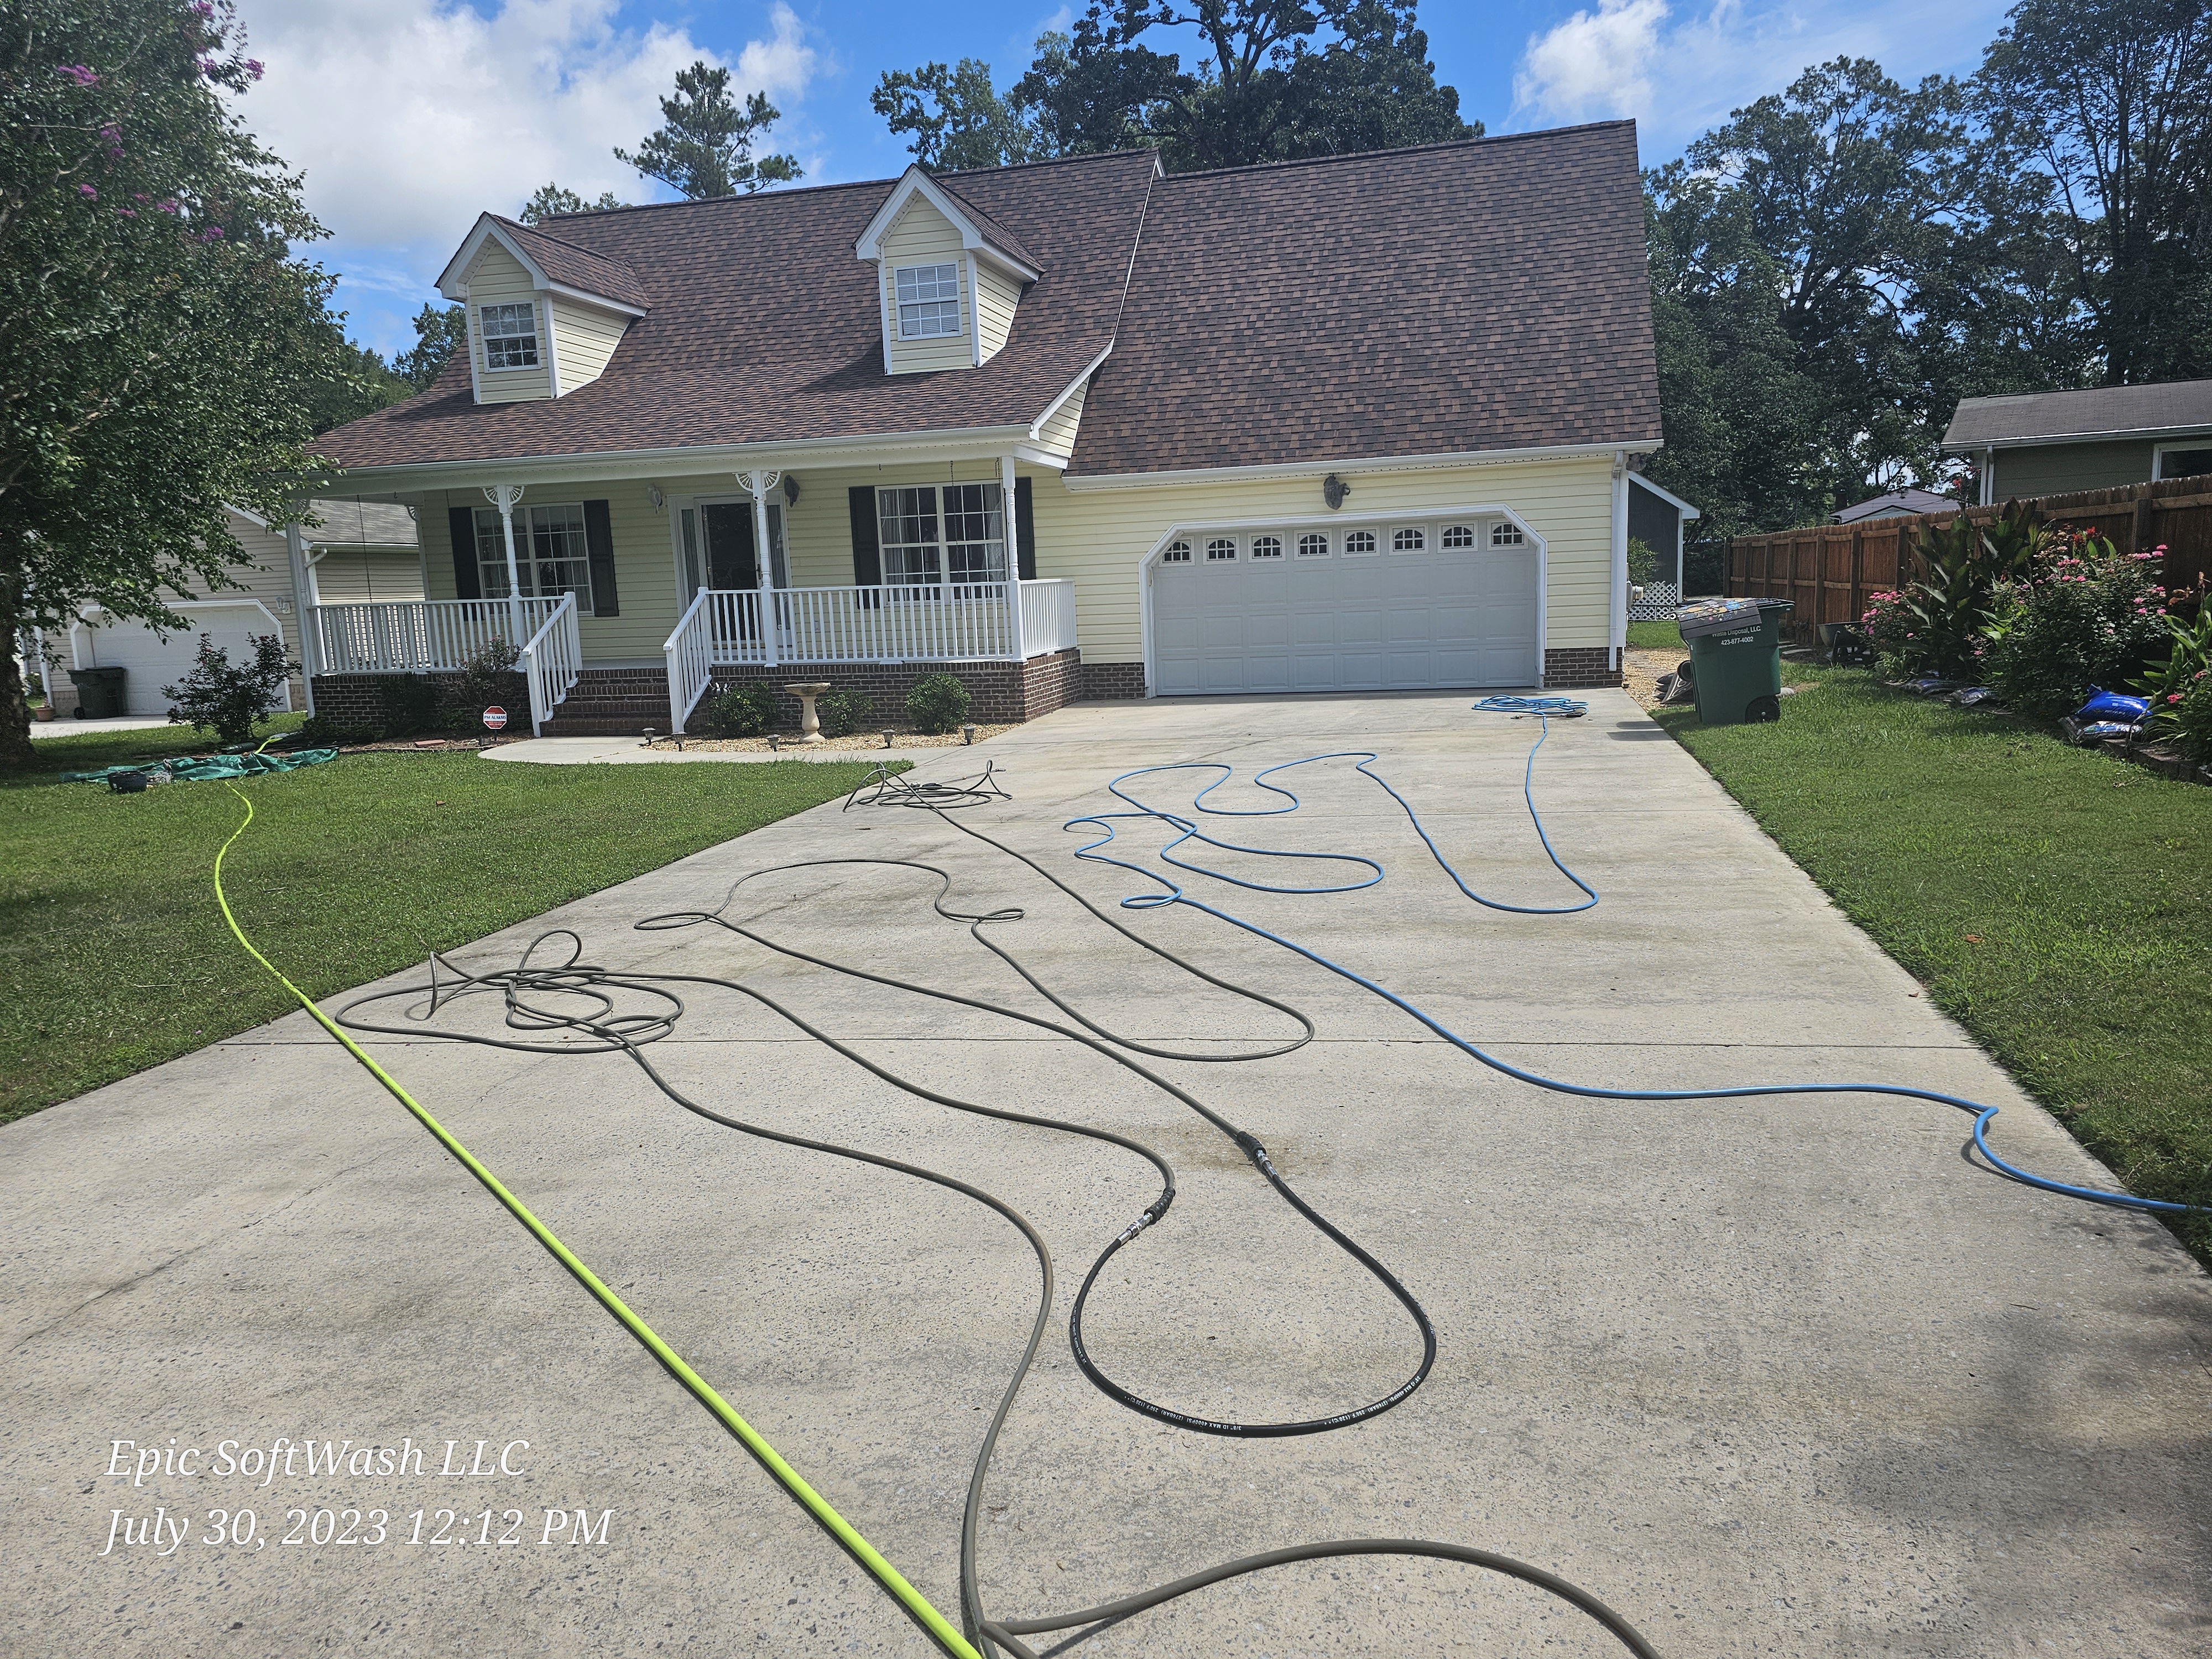 House and Driveway Washing in Chattanooga, TN